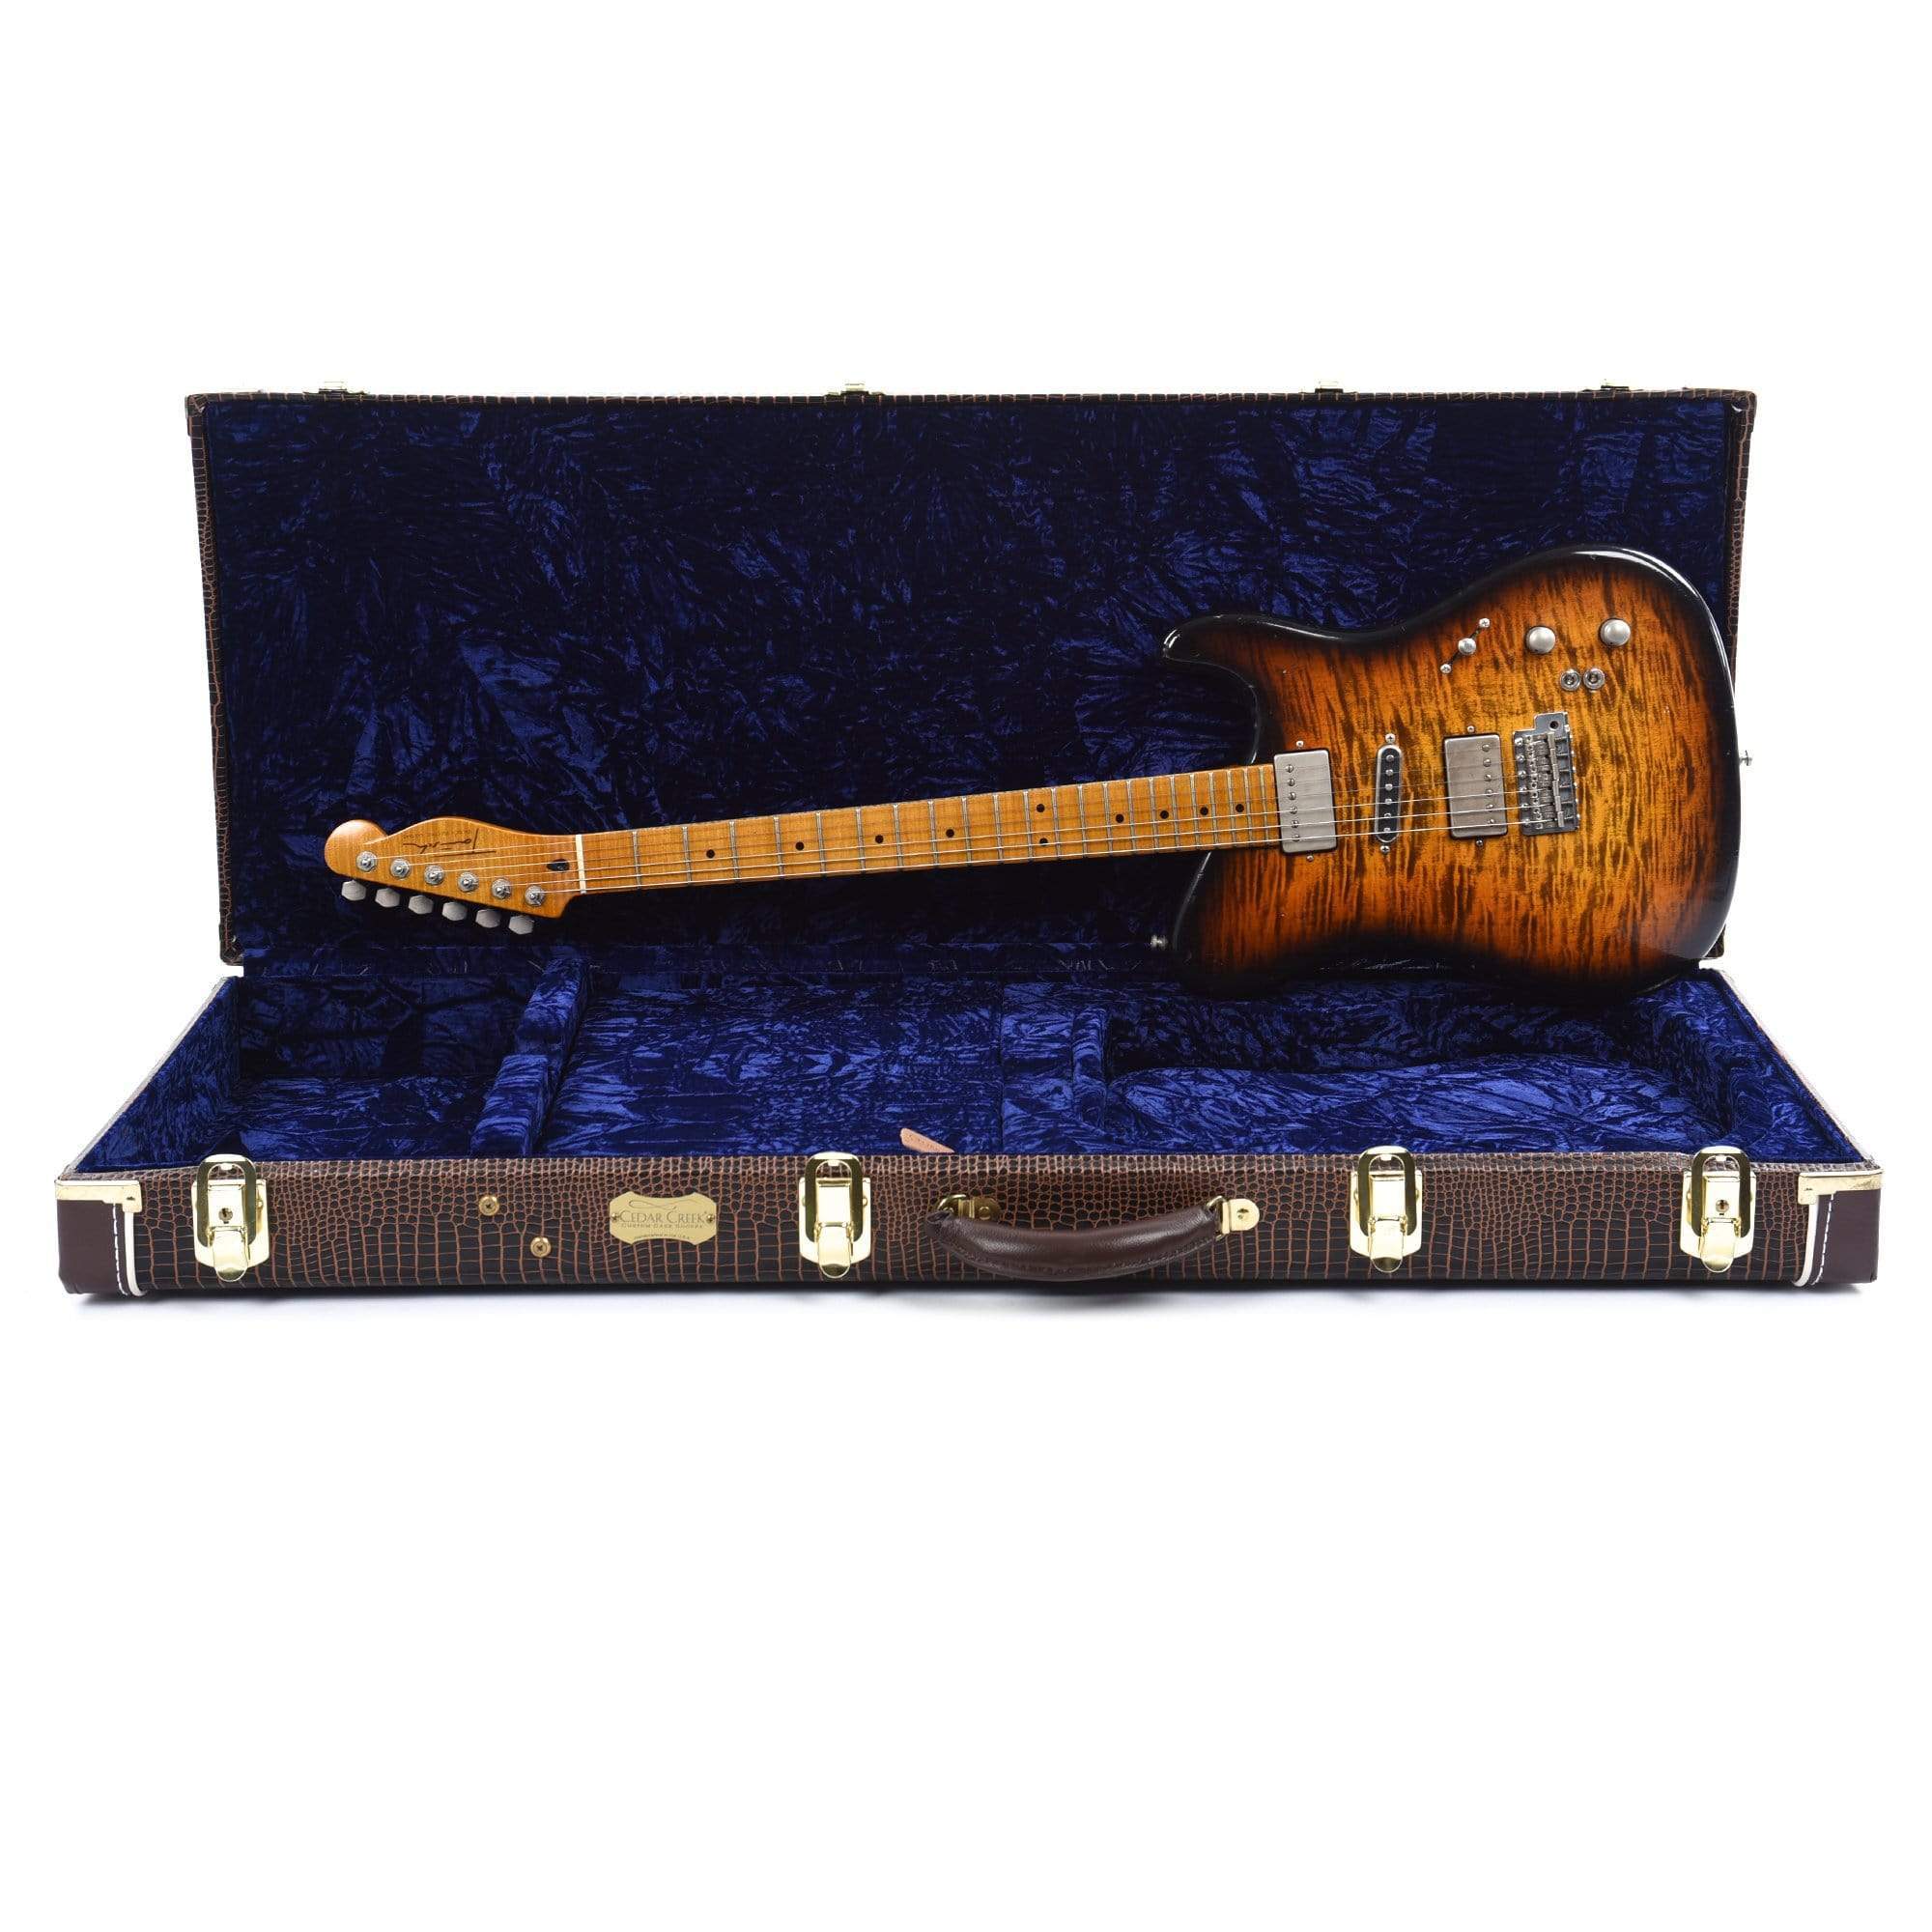 Tausch 665 Raw Deluxe Figured Maple Aged Antique Sunburst w/Tauschbuckers & Middle Single Coil Electric Guitars / Solid Body